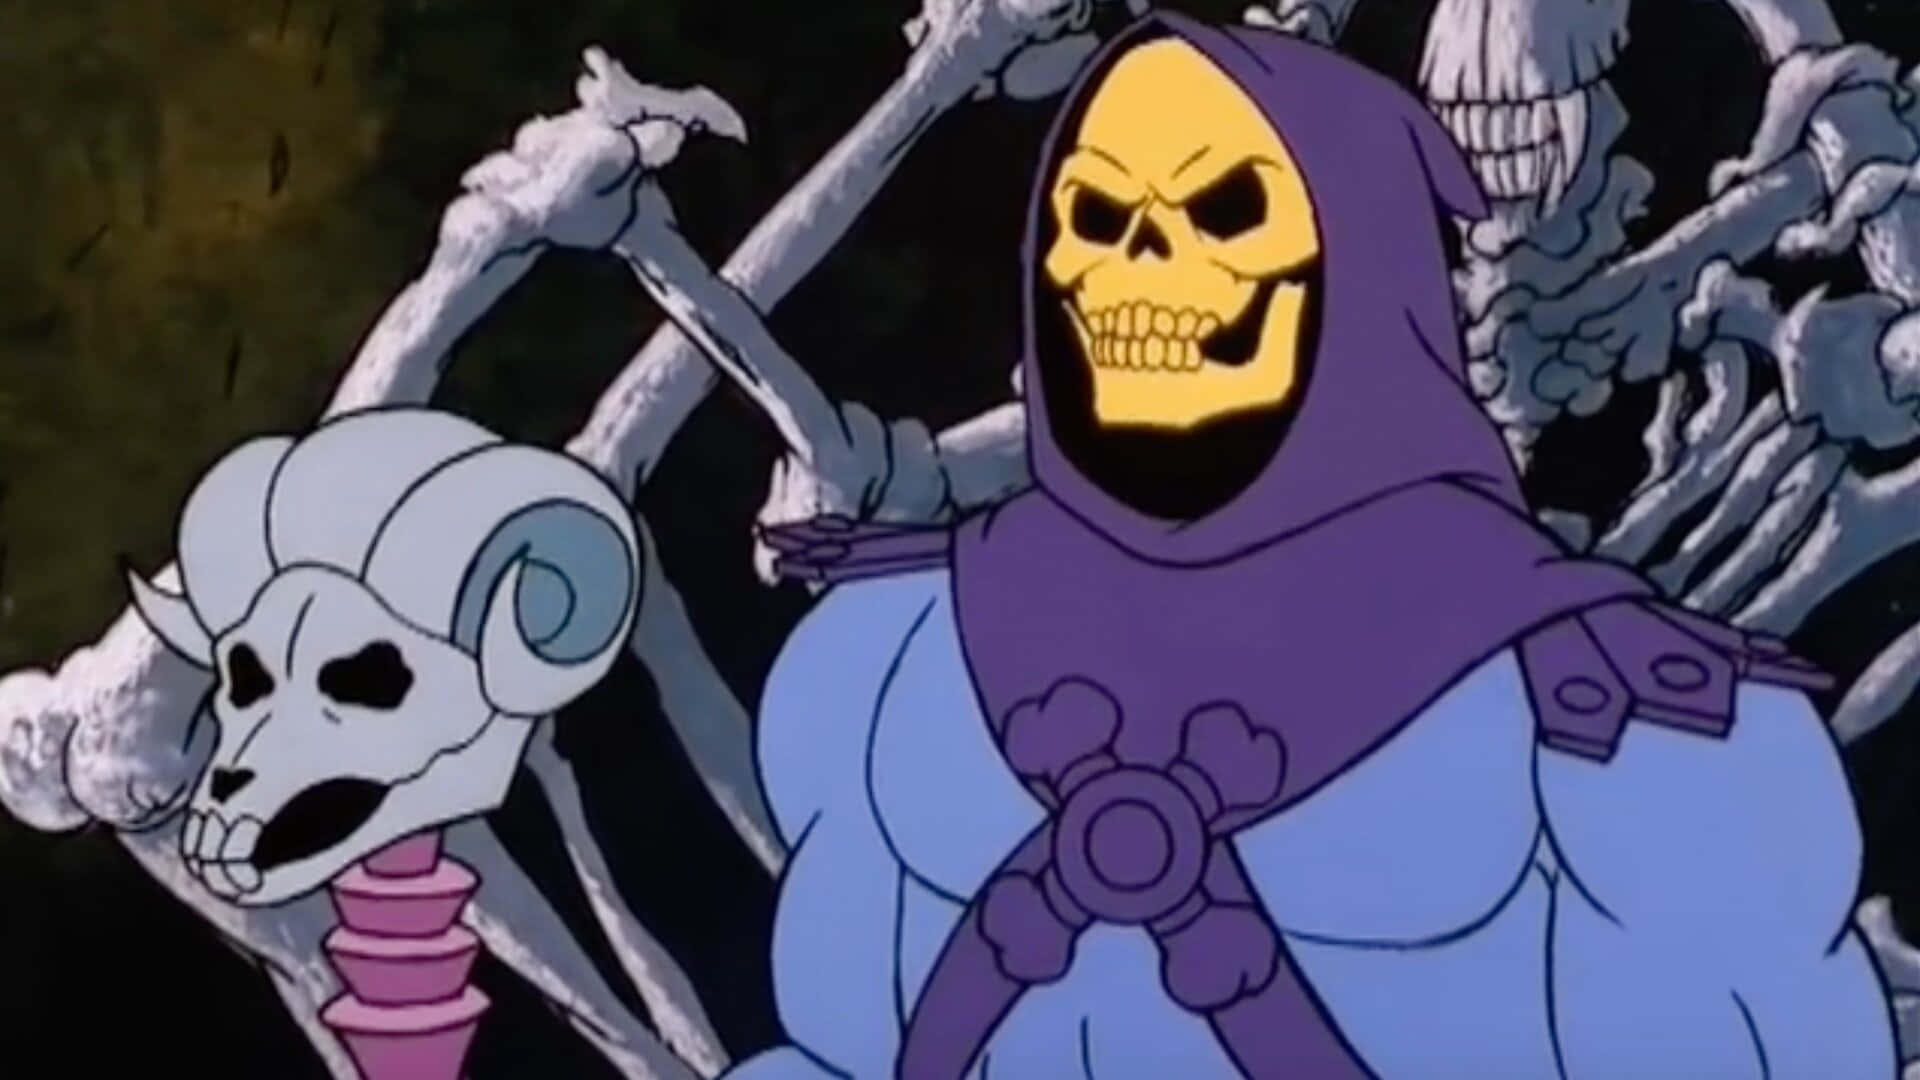 A Cartoon Character With Skeletons And Skeletons